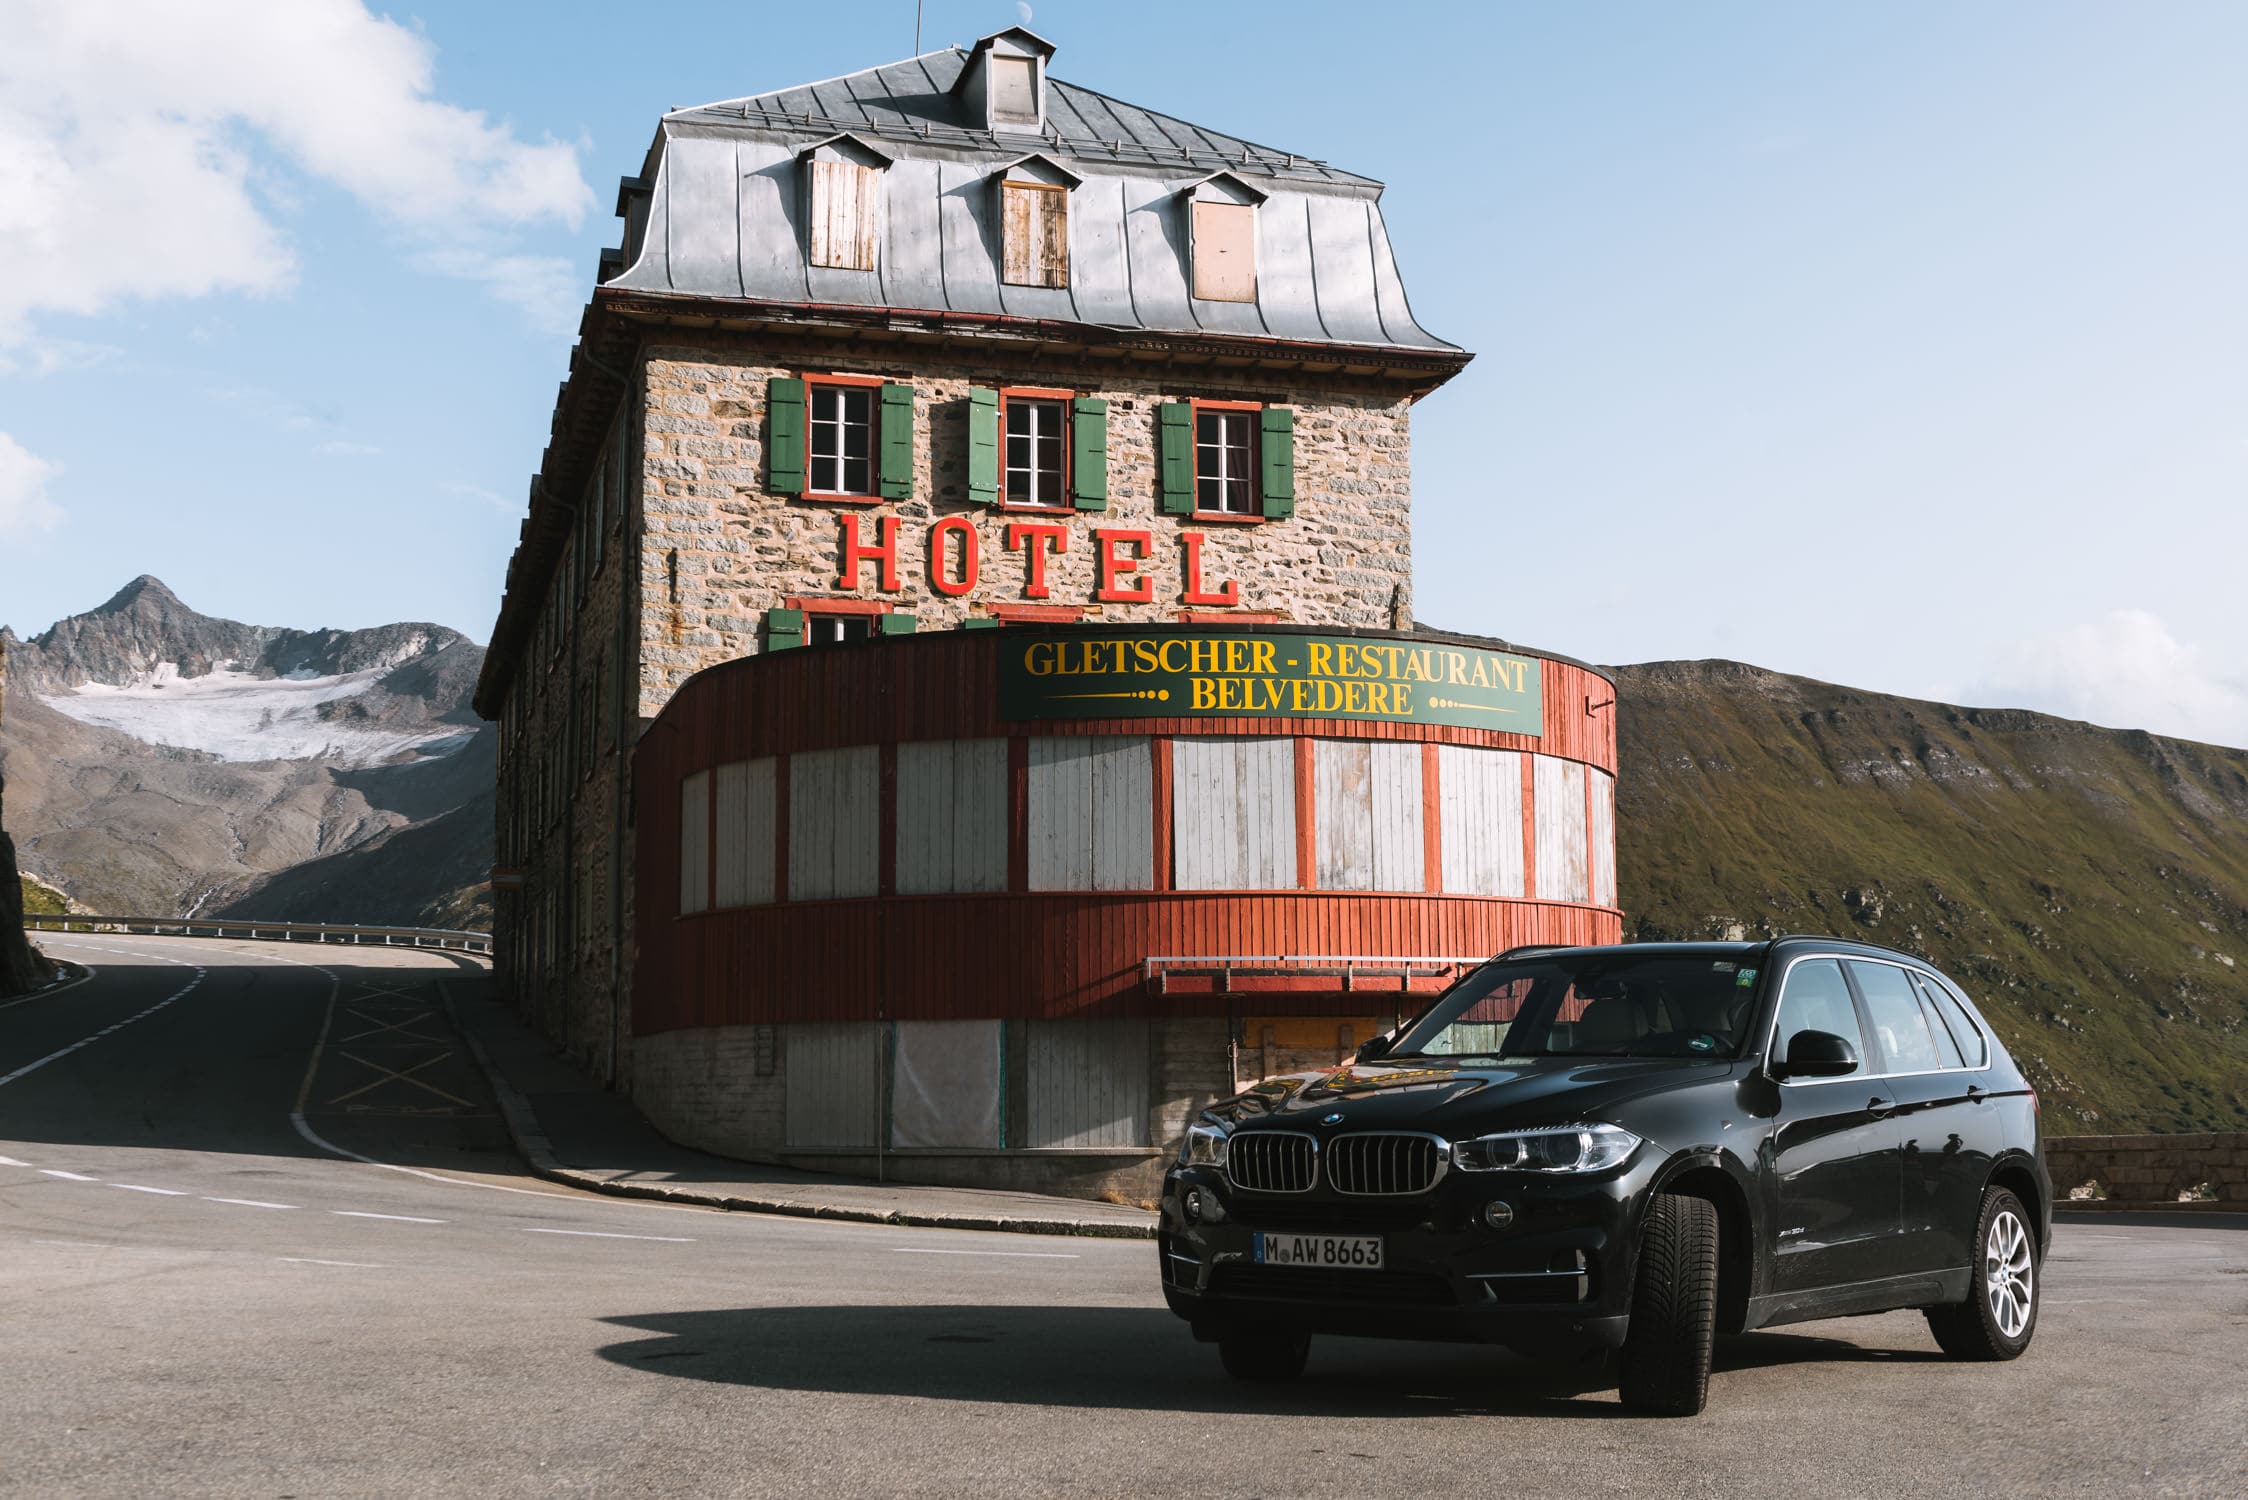 From a roadtrip through the Italian and Swiss alps for Sixt using a BMW X5 to drive through the mountain landscapes by photographer Michael Schauer